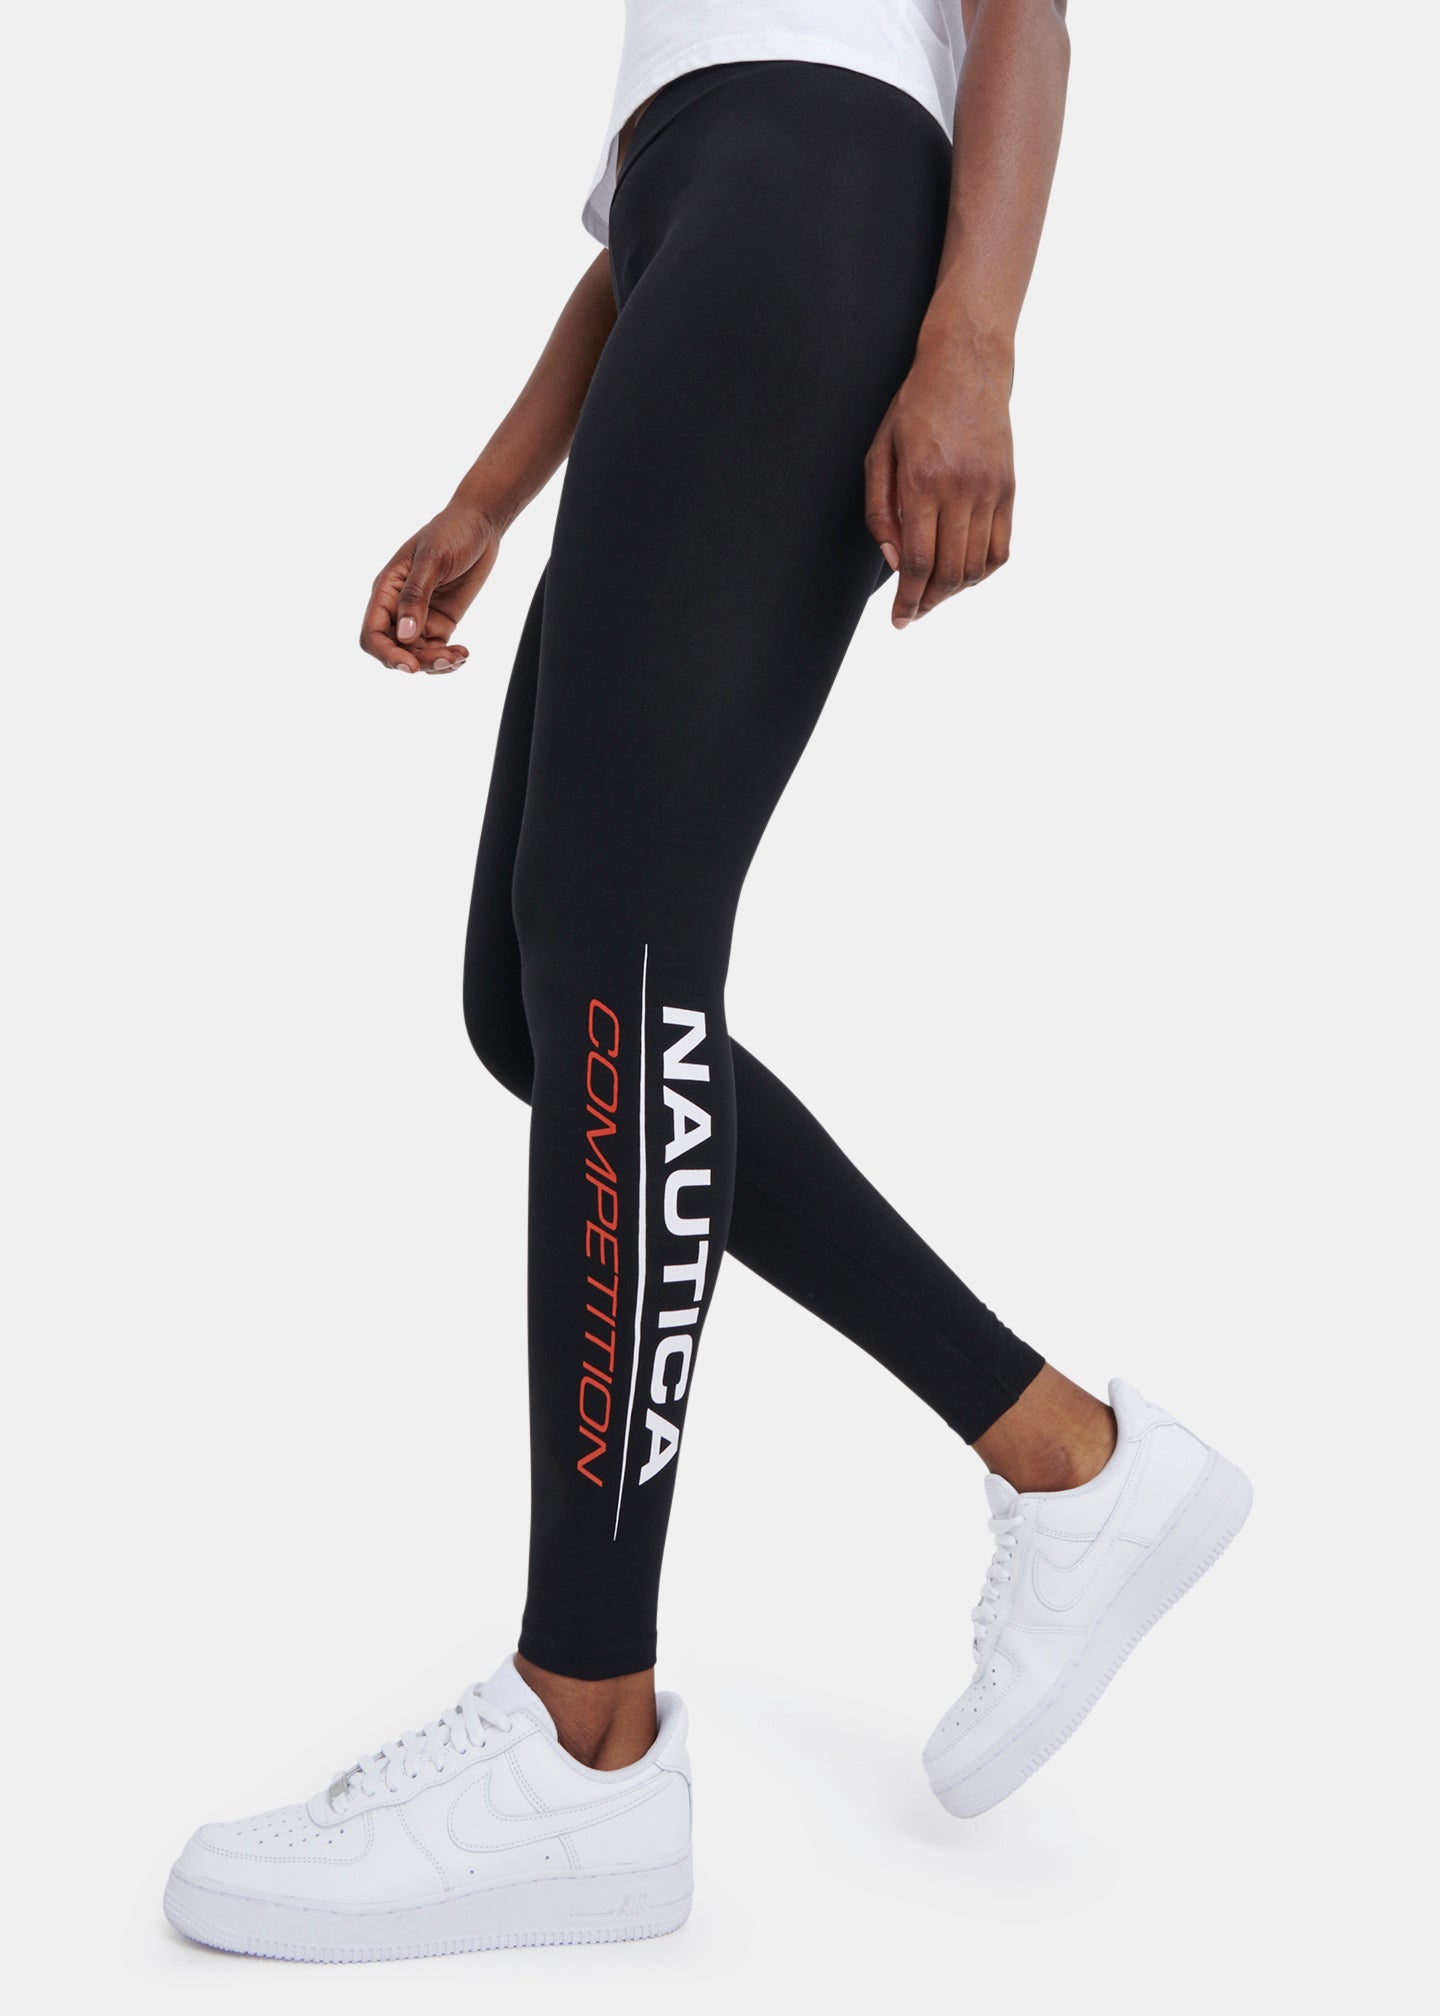 Ethos Active Swan Legging Ideal Pair of Leggings for all Sports &  Activities - Acenla